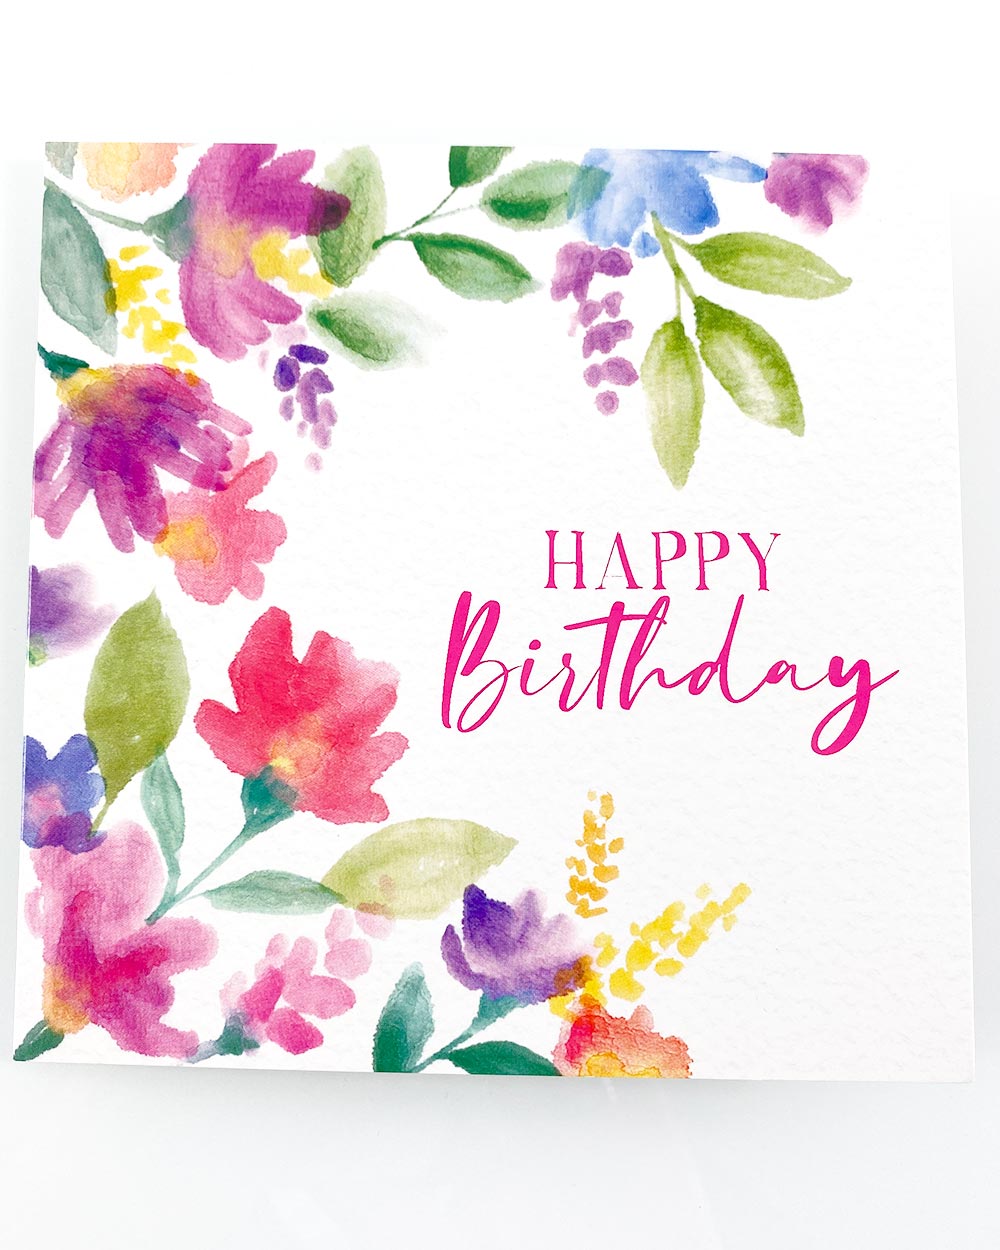 Get stocked up on charity birthday cards! With their assorted designs to suit different ages, this 5 pack of cards are ideal for anyone.  These cards are all made from FSC board which has also been carbon balanced. A perfect purchase for the environmentally conscious!